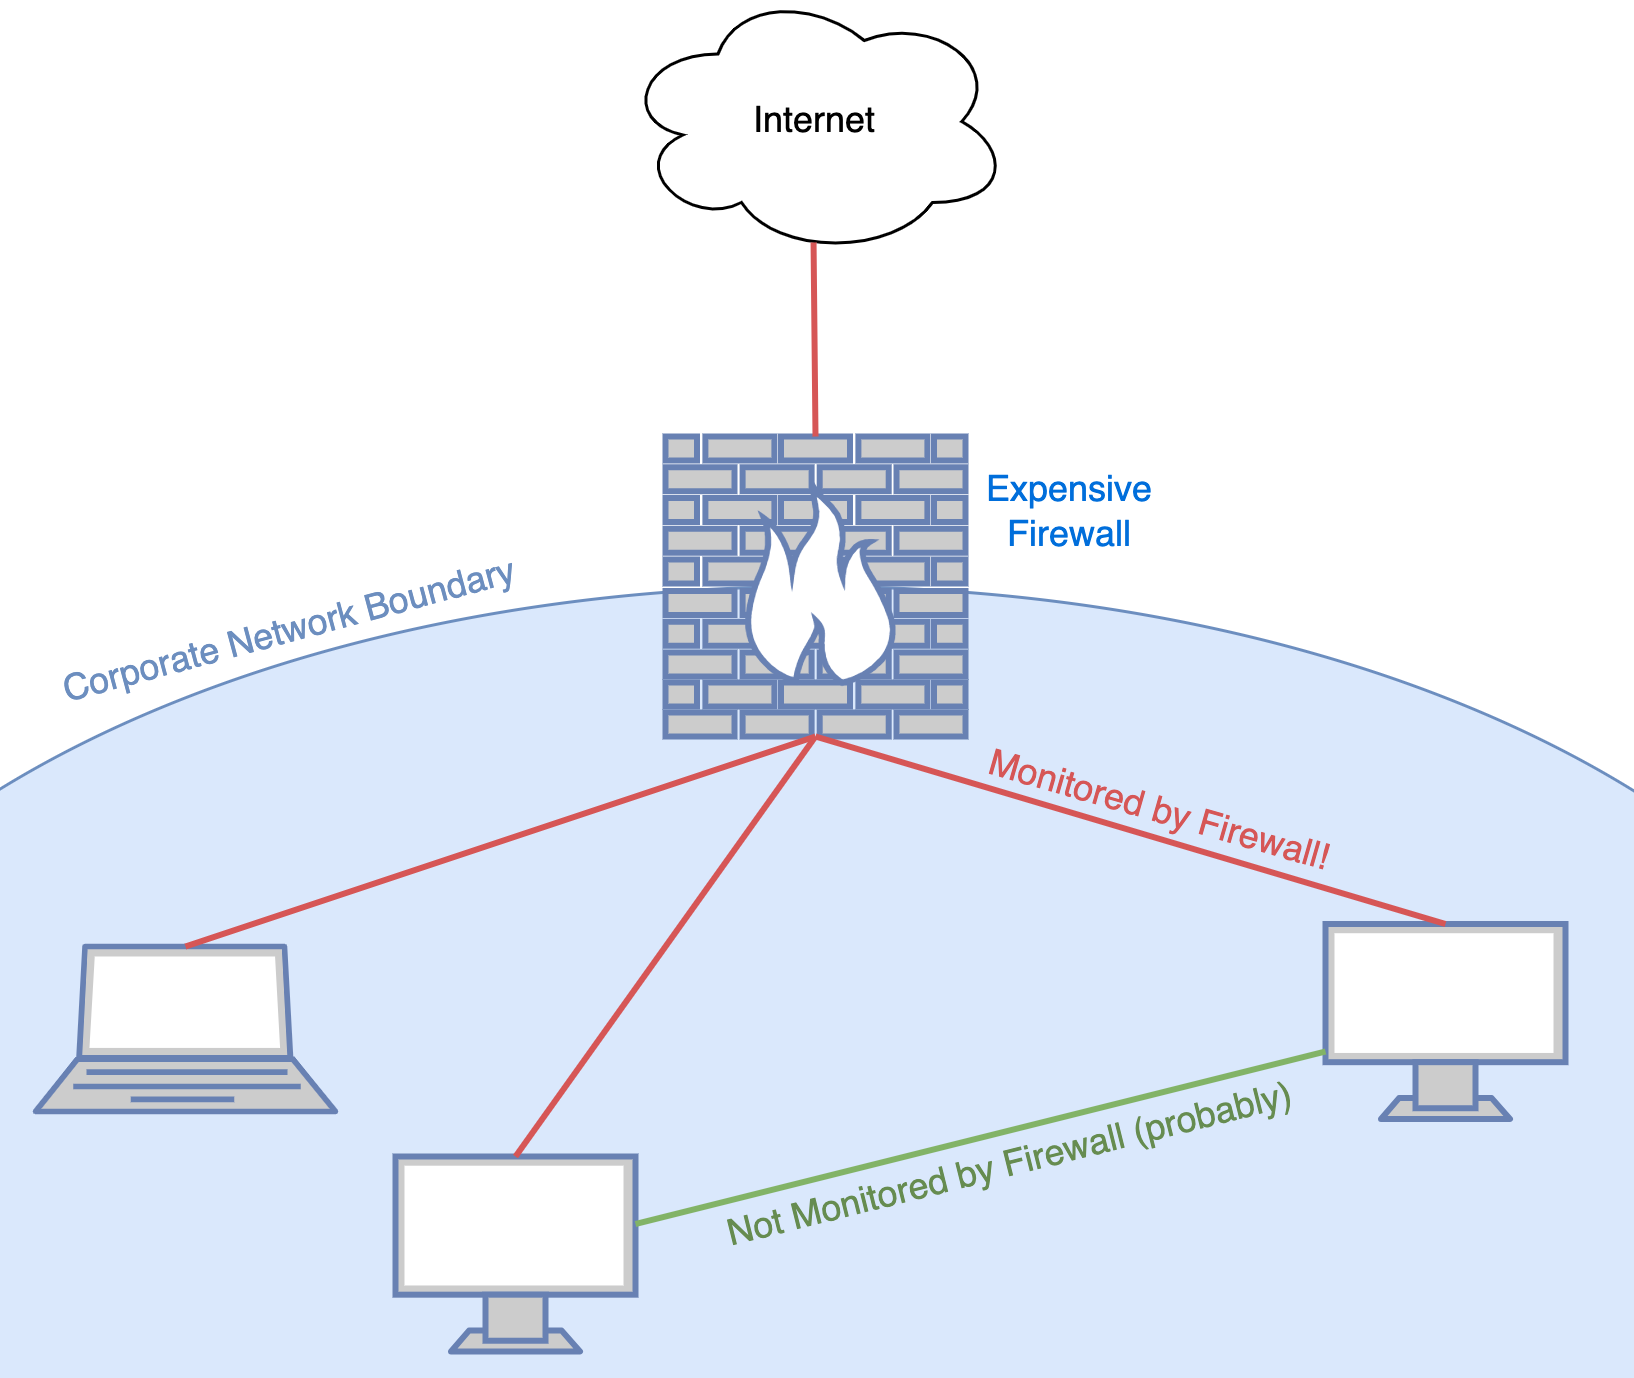 Most network traffic inspection happens on the border between the internal network and the internet